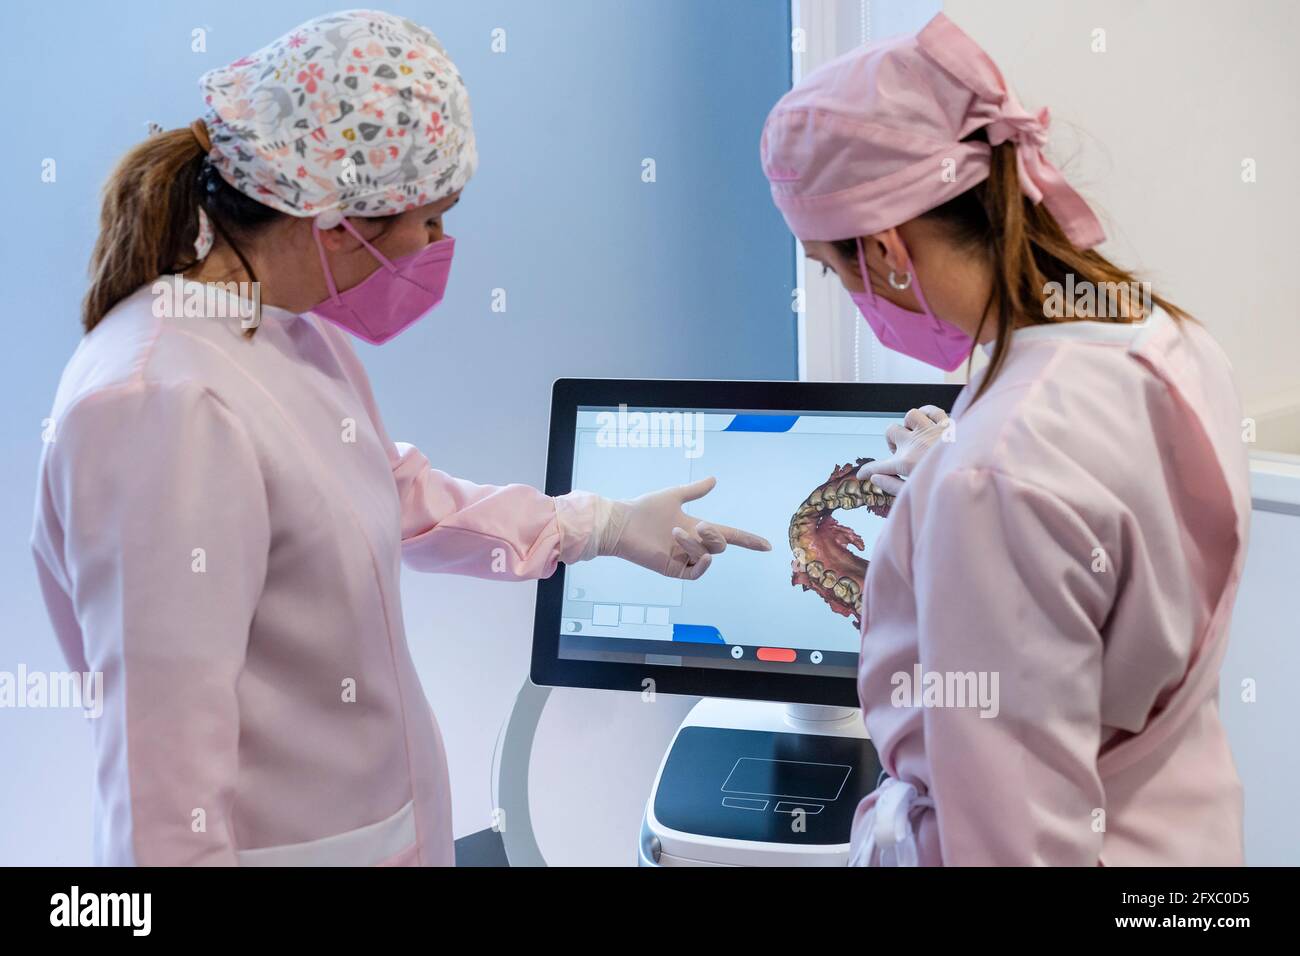 Female dentists in uniform examining digital image of teeth on screen at clinic Stock Photo